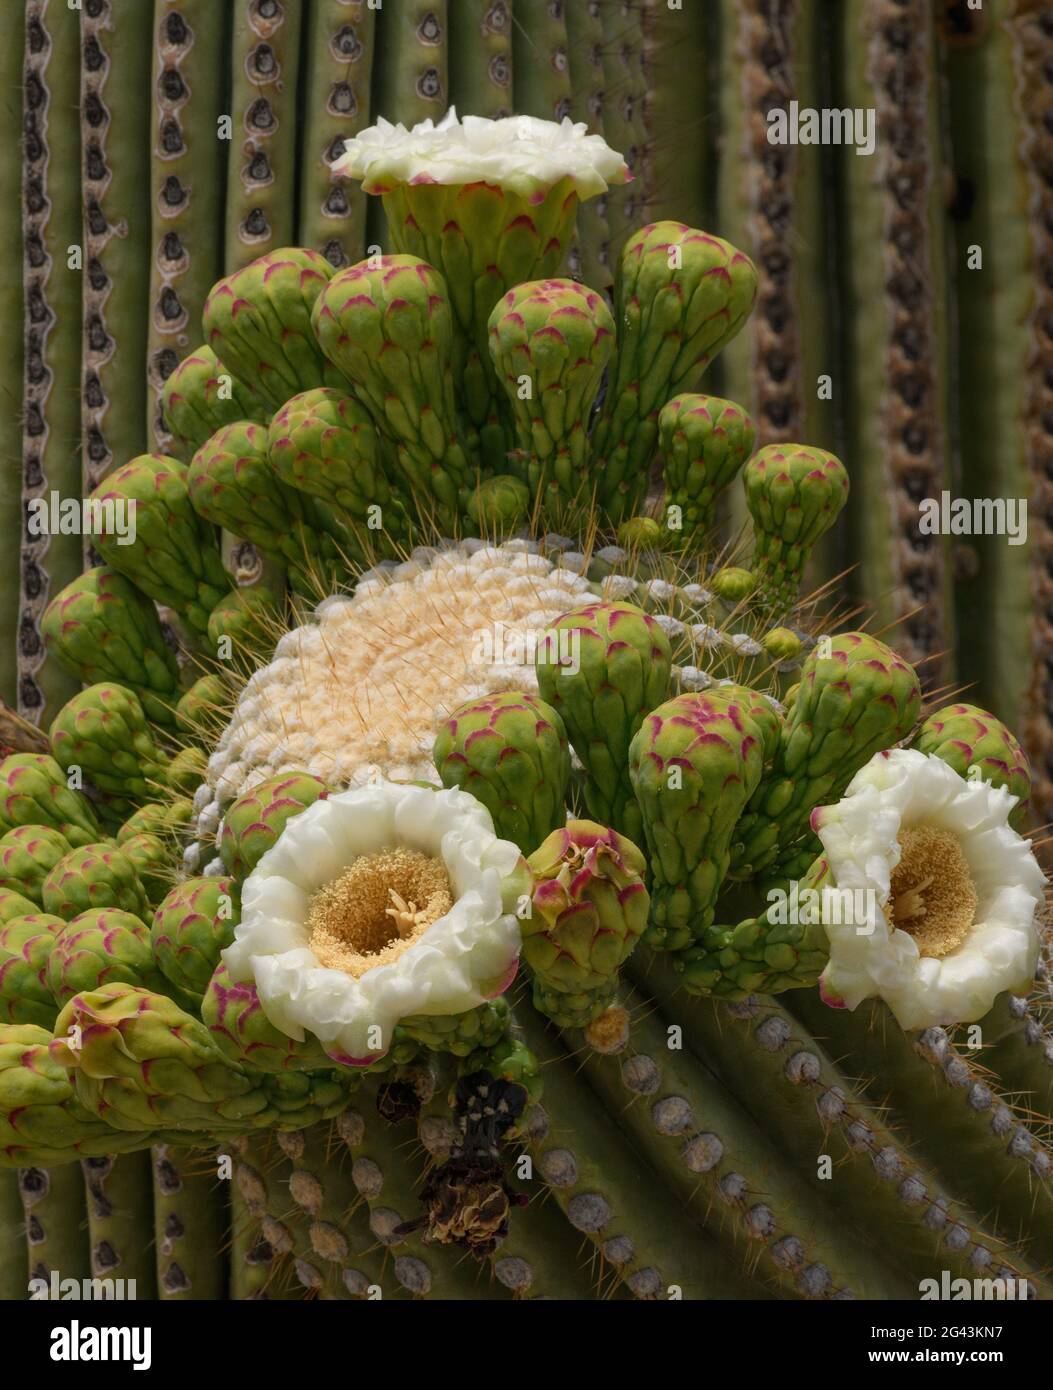 Saguaro cactus sprouted an unprecedented number of 'side blooms' during May, their typical Spring flowering season, Sonoran Desert, Tucson, Arizona, U Stock Photo